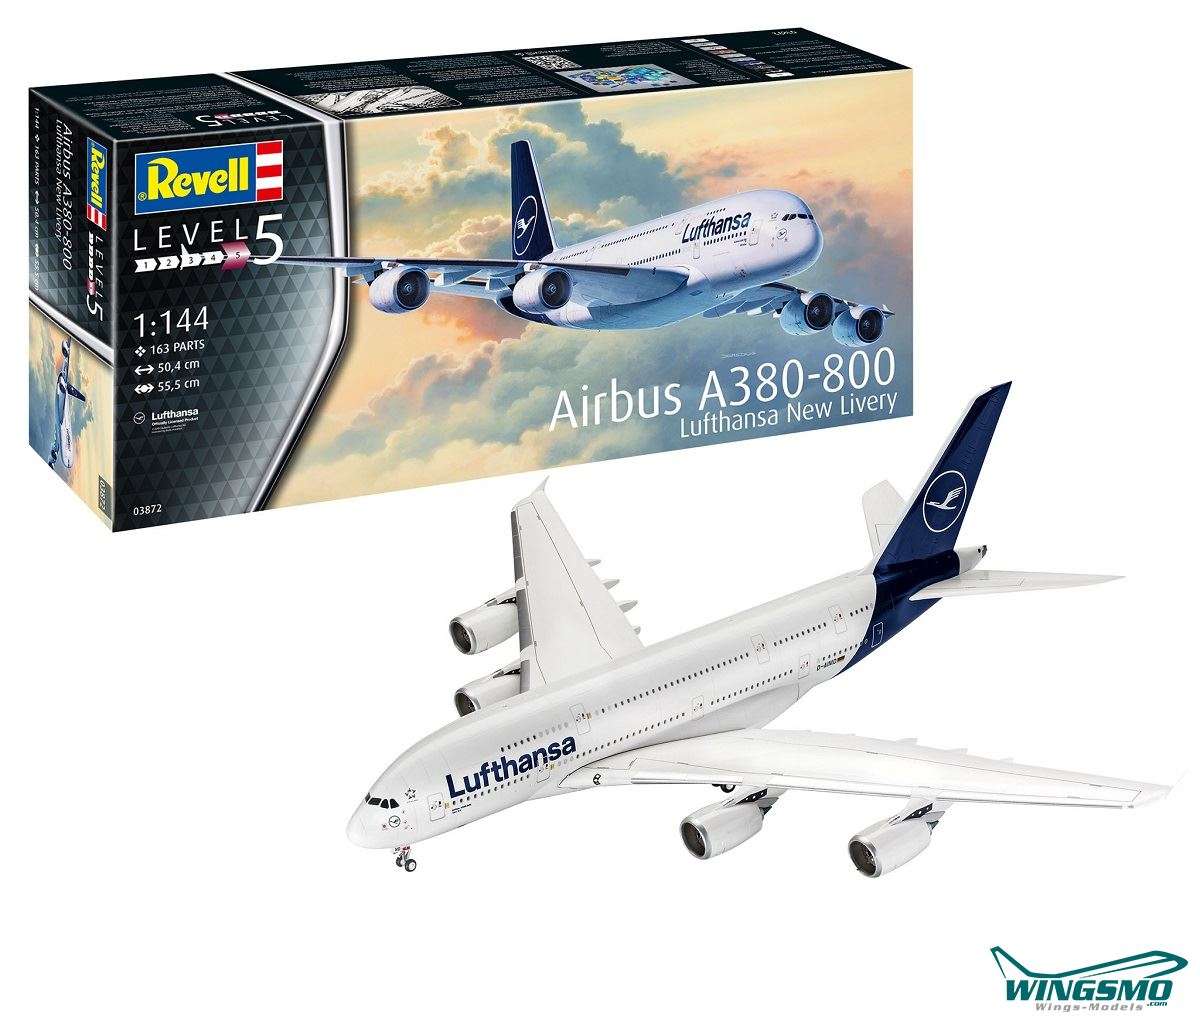 Revell Aircraft Lufthansa Airbus A380-800 New Livery 1: 144 03872